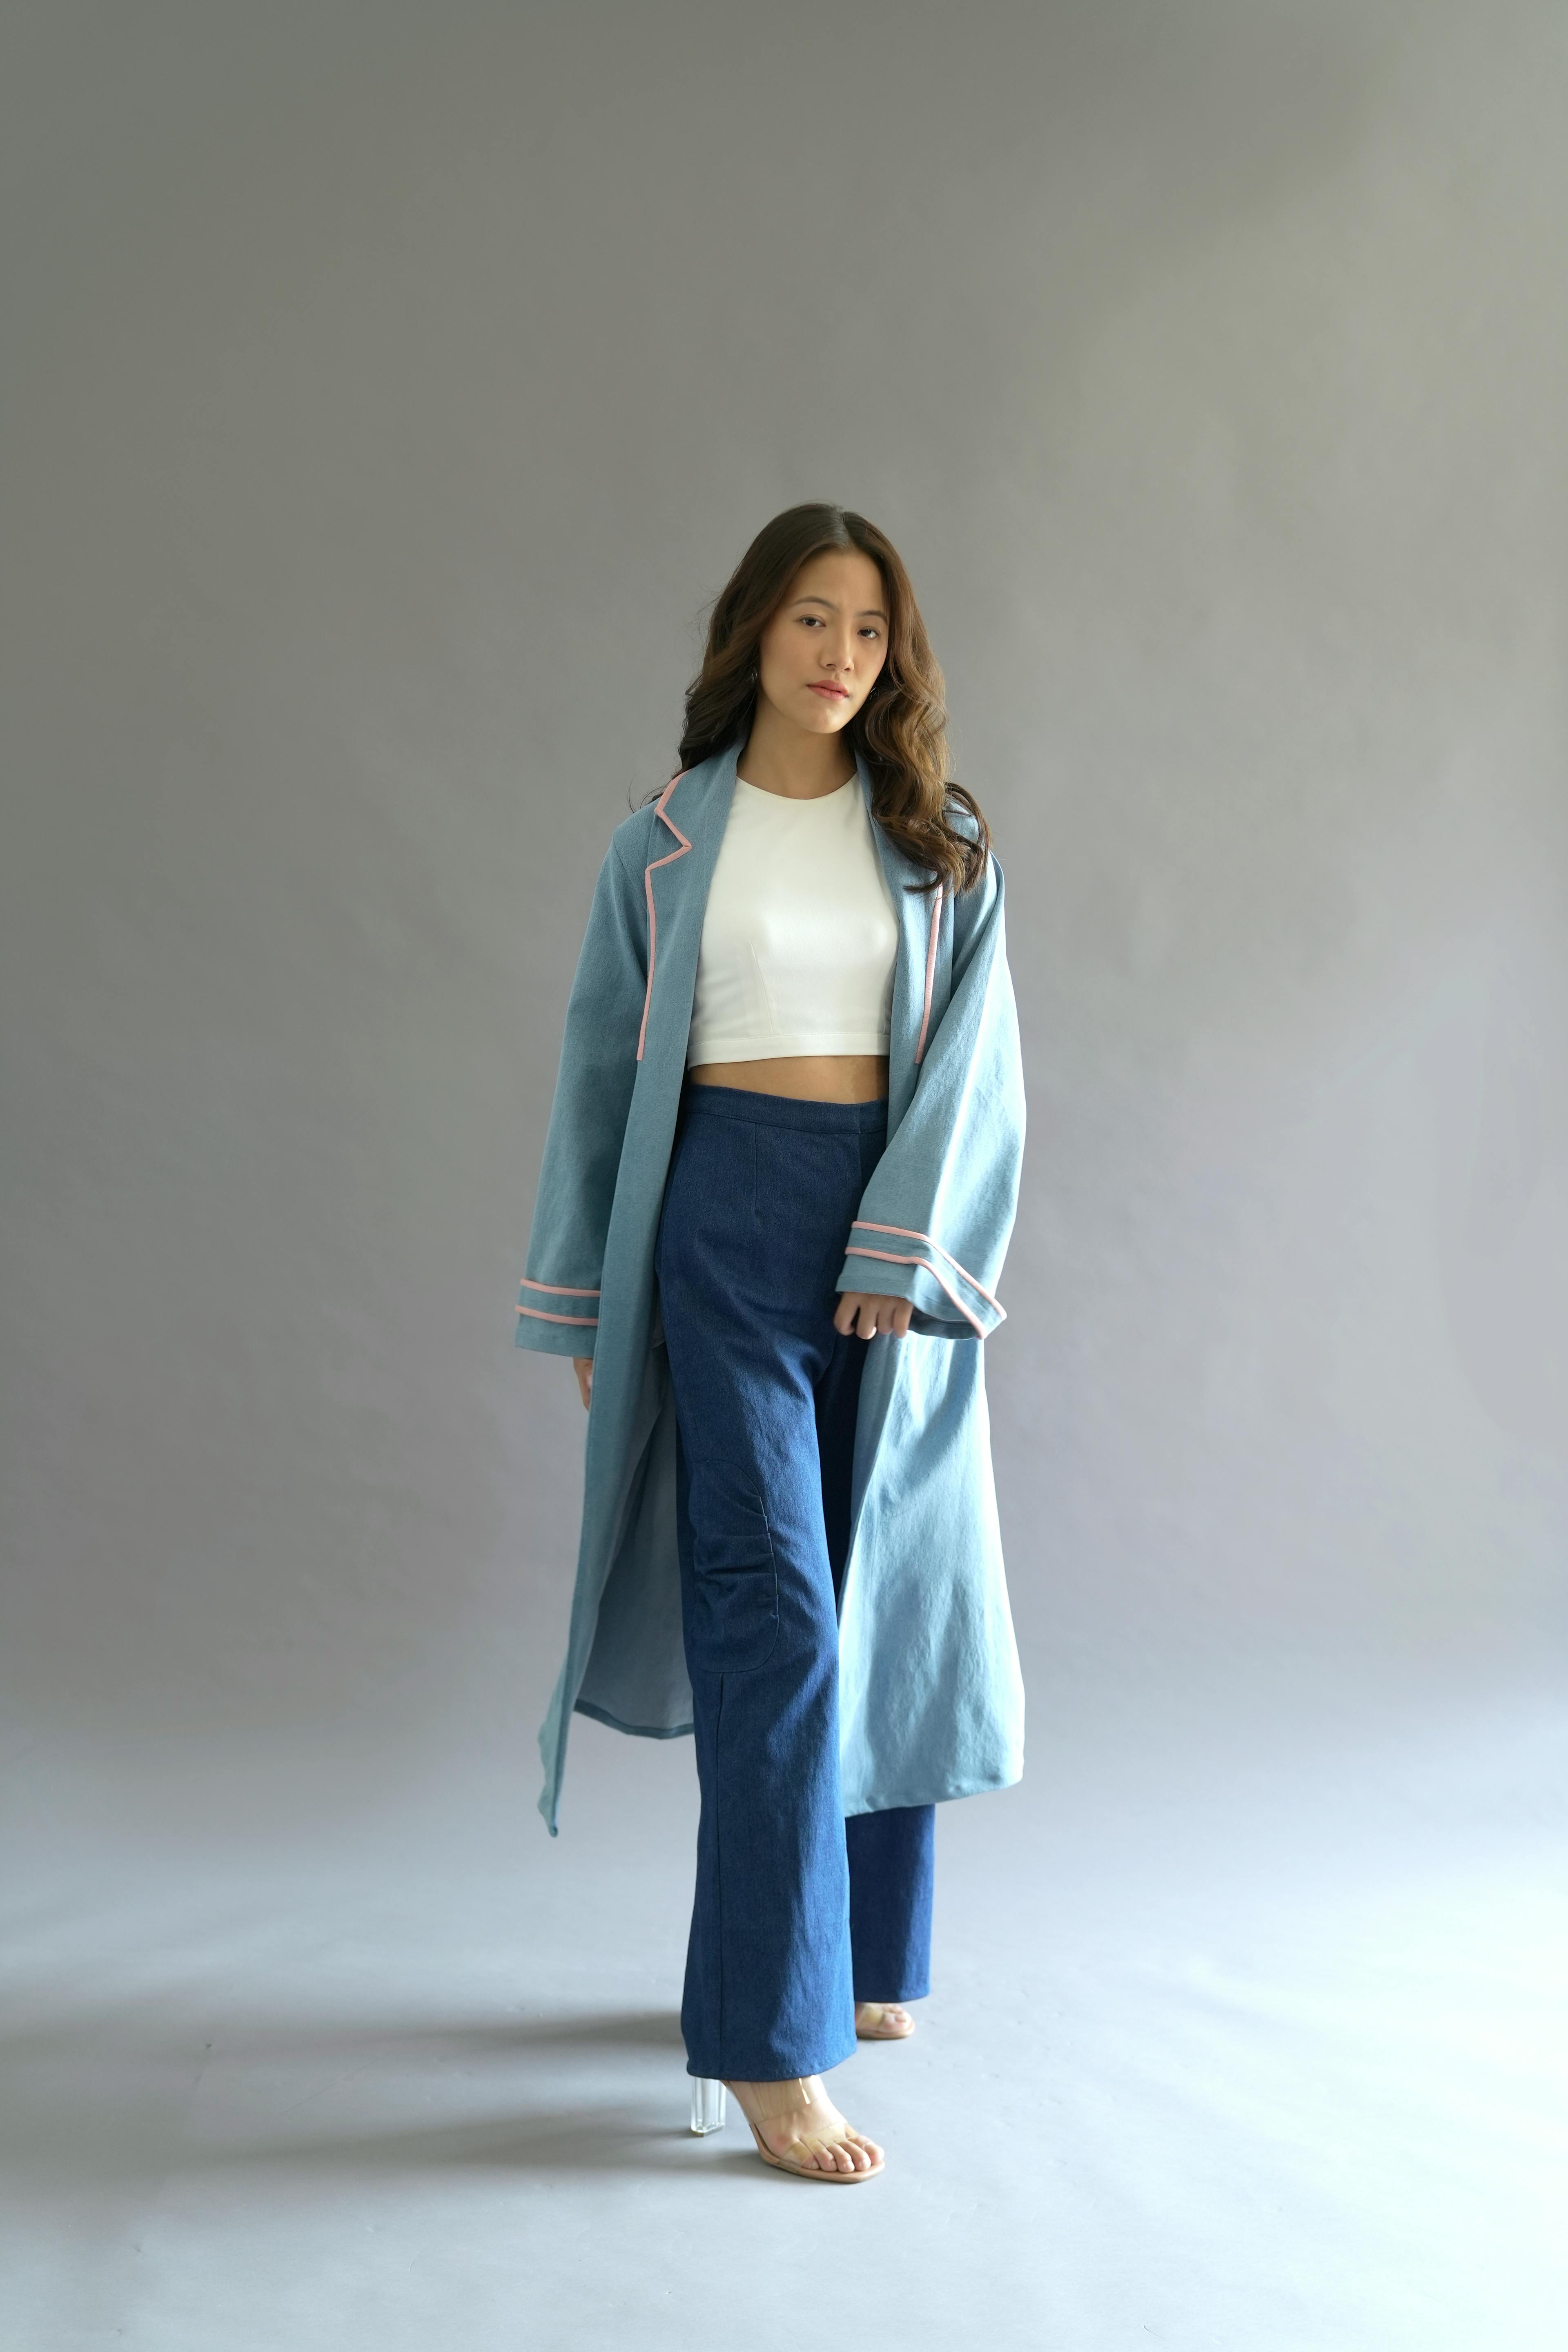 Thumbnail preview #1 for Light blue trench coat 